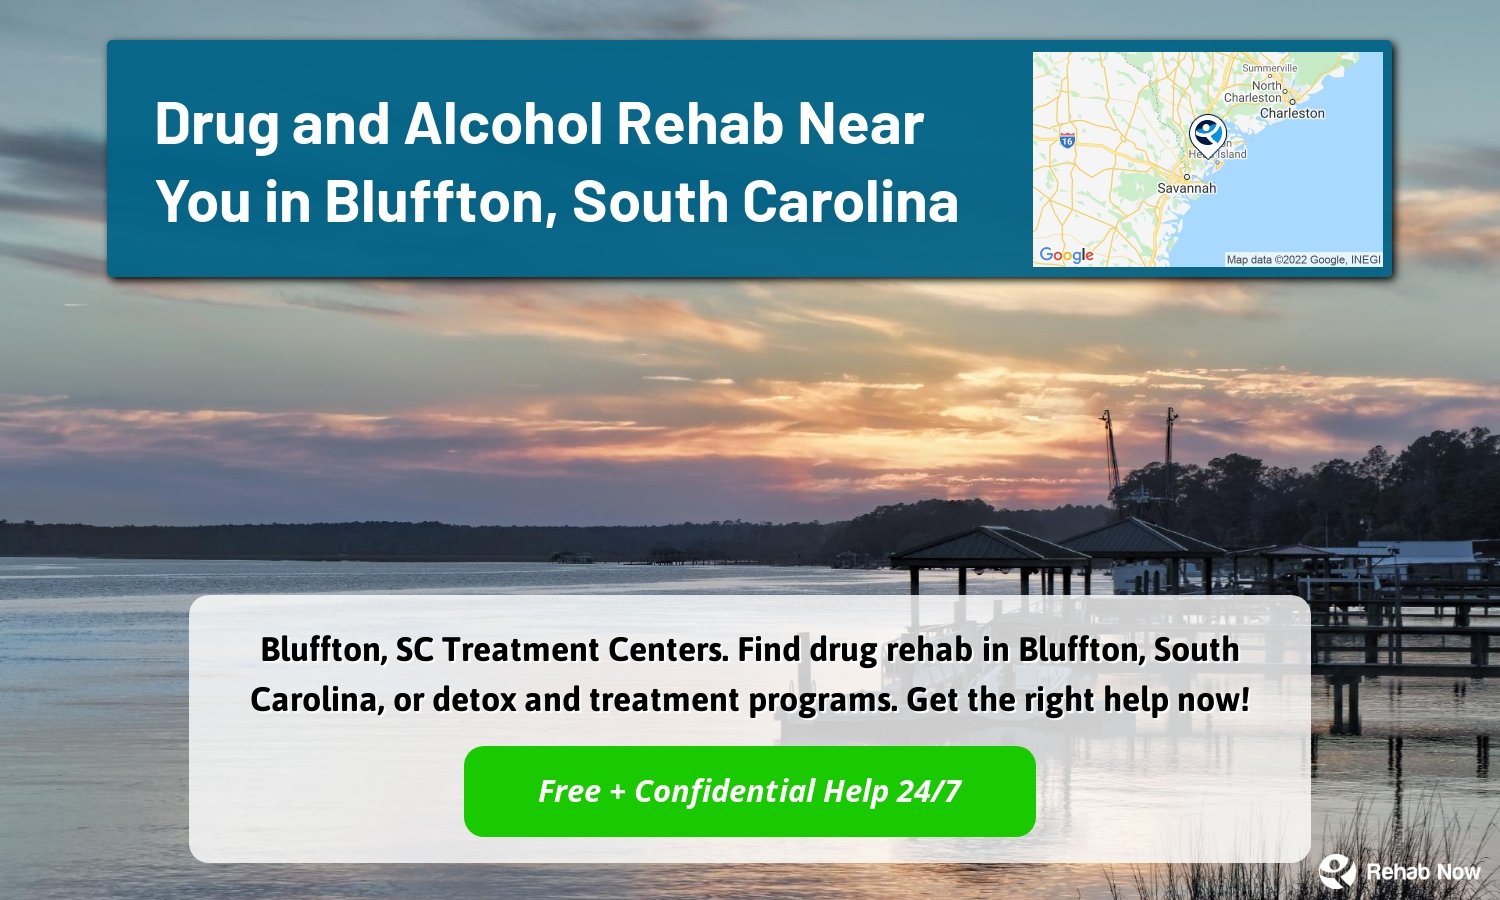 Bluffton, SC Treatment Centers. Find drug rehab in Bluffton, South Carolina, or detox and treatment programs. Get the right help now!